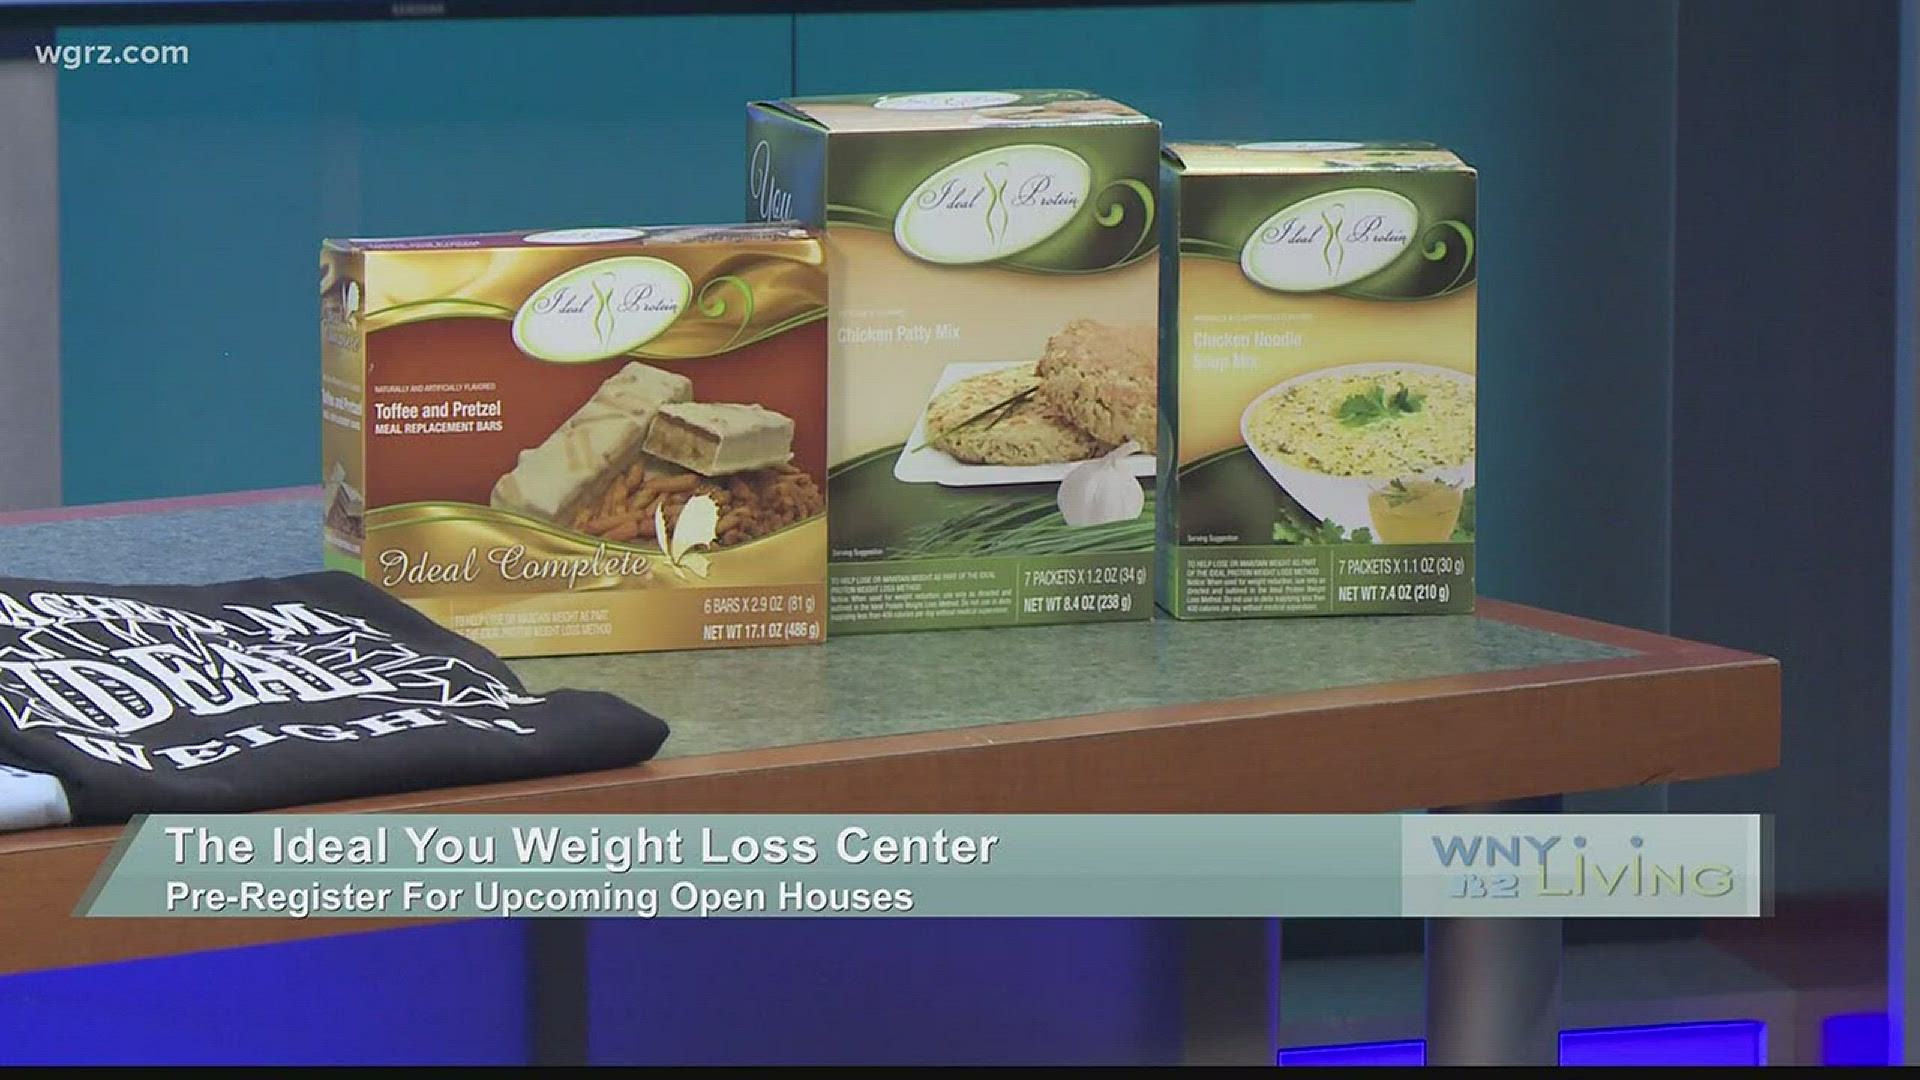 WNY Living - February 12 - The Ideal You Weight Loss Center